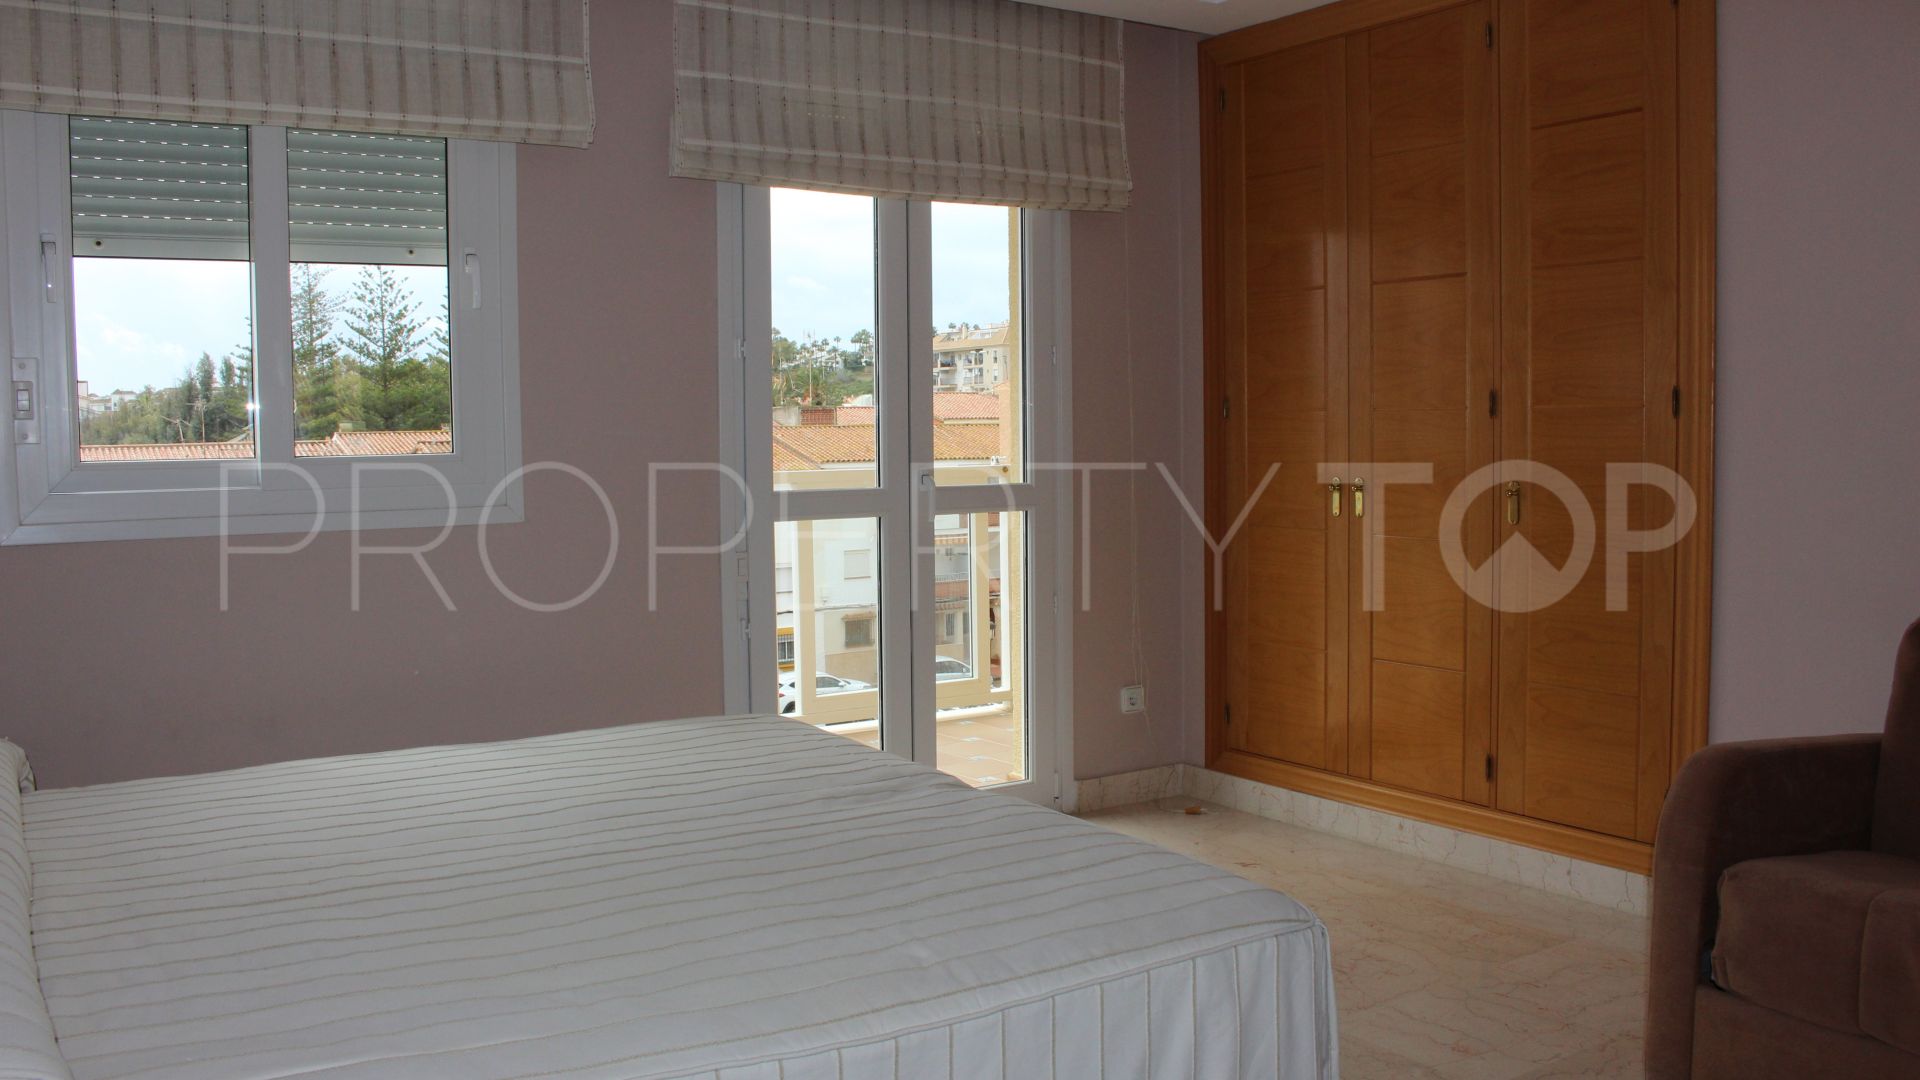 4 bedrooms apartment for sale in Sabinillas